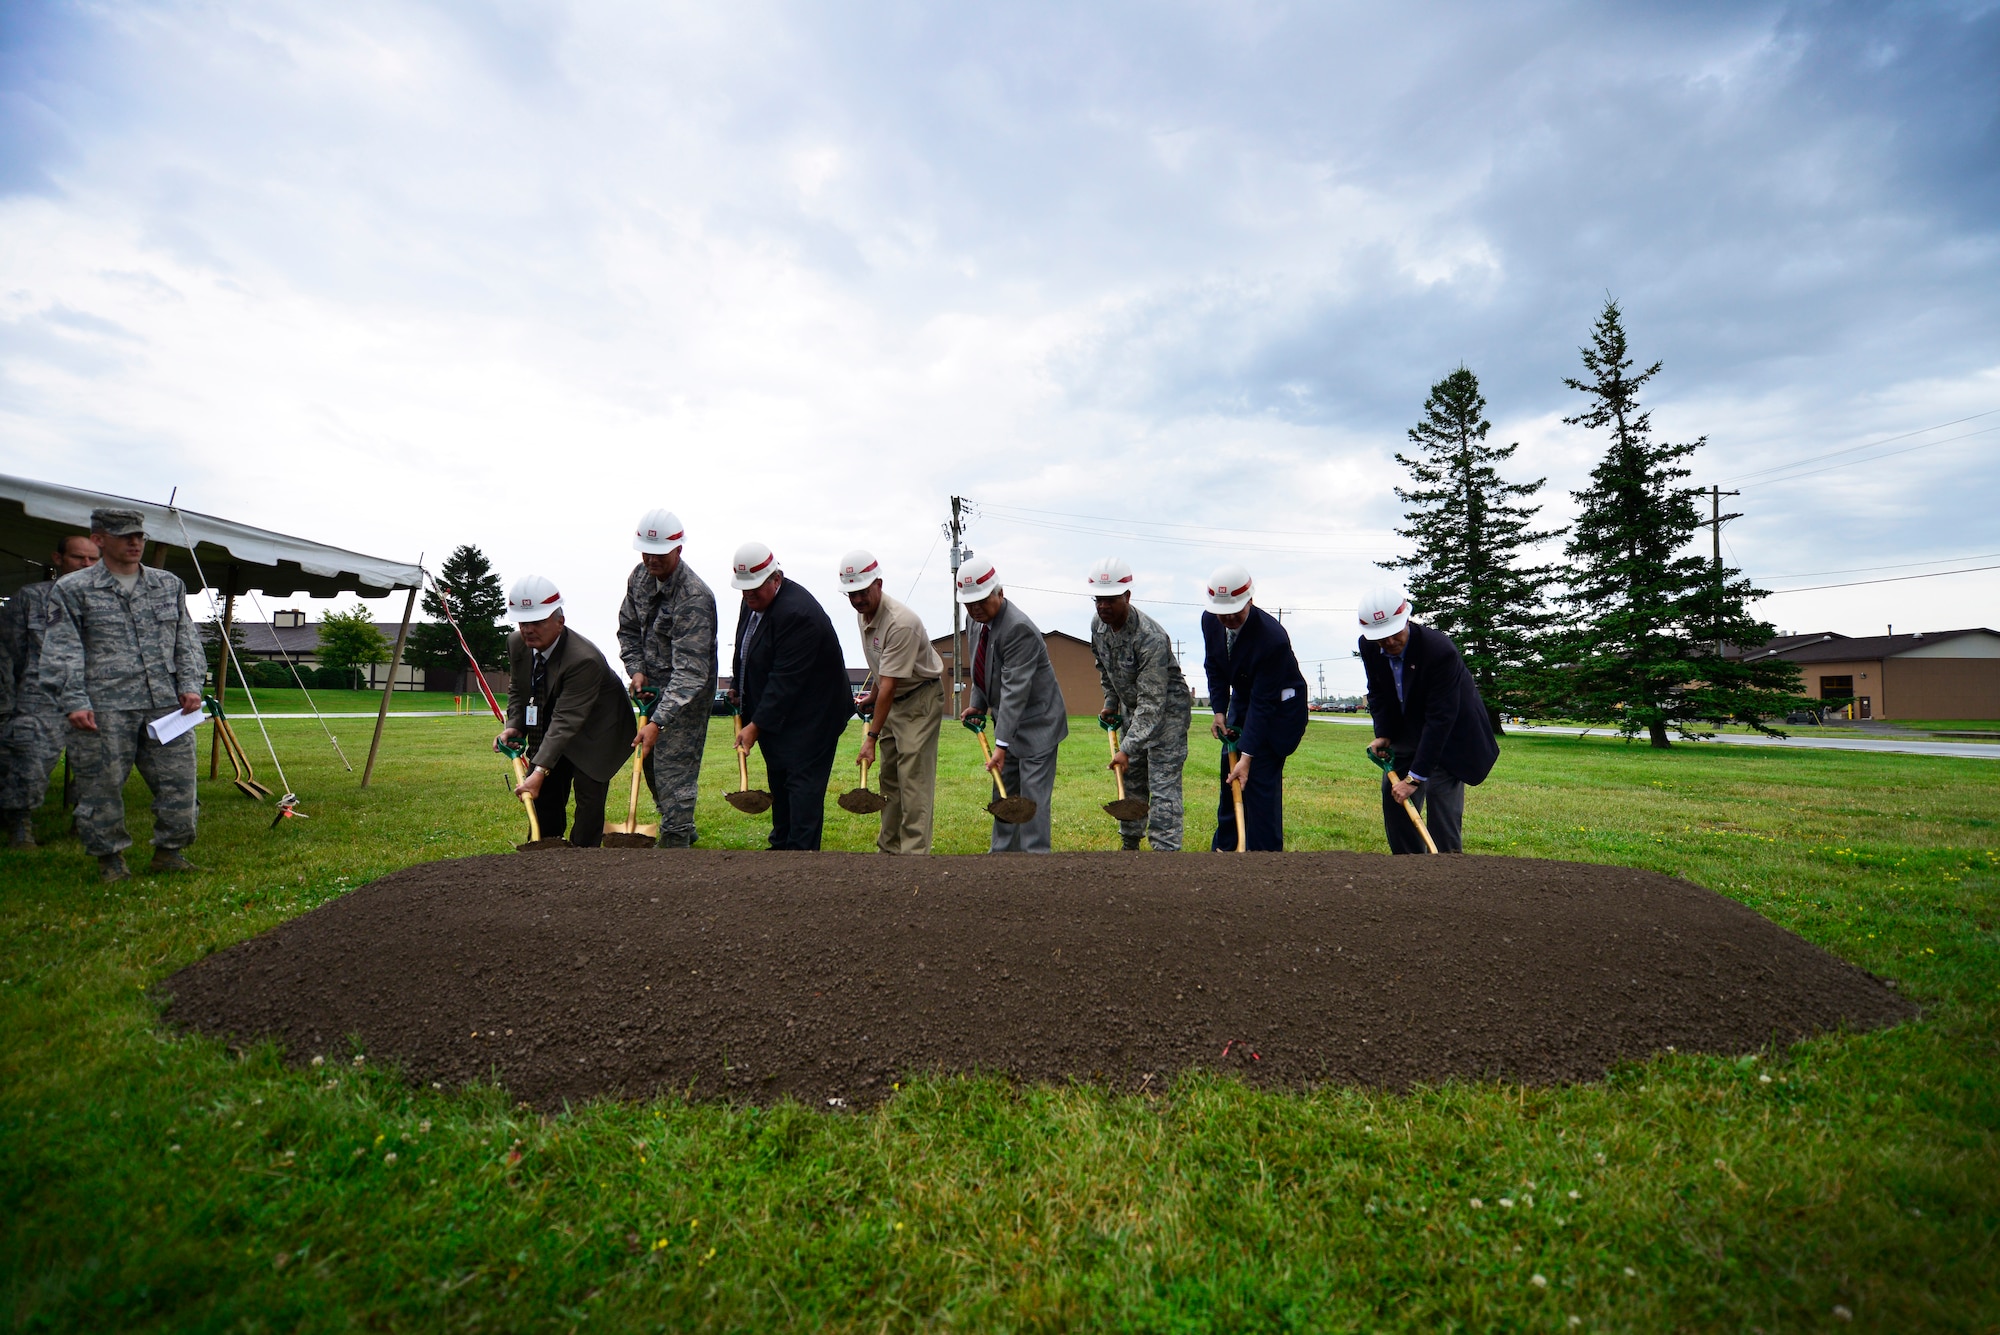 A ground-breaking ceremony is held here, August 5, 2014, for a C-130 Simulator which will be built on the installation and is estimated to bring over 450 students to the base each year as well as provide up to 18 full-time positions. (U.S. Air Force photo by Staff Sgt. Stephanie Sawyer)  